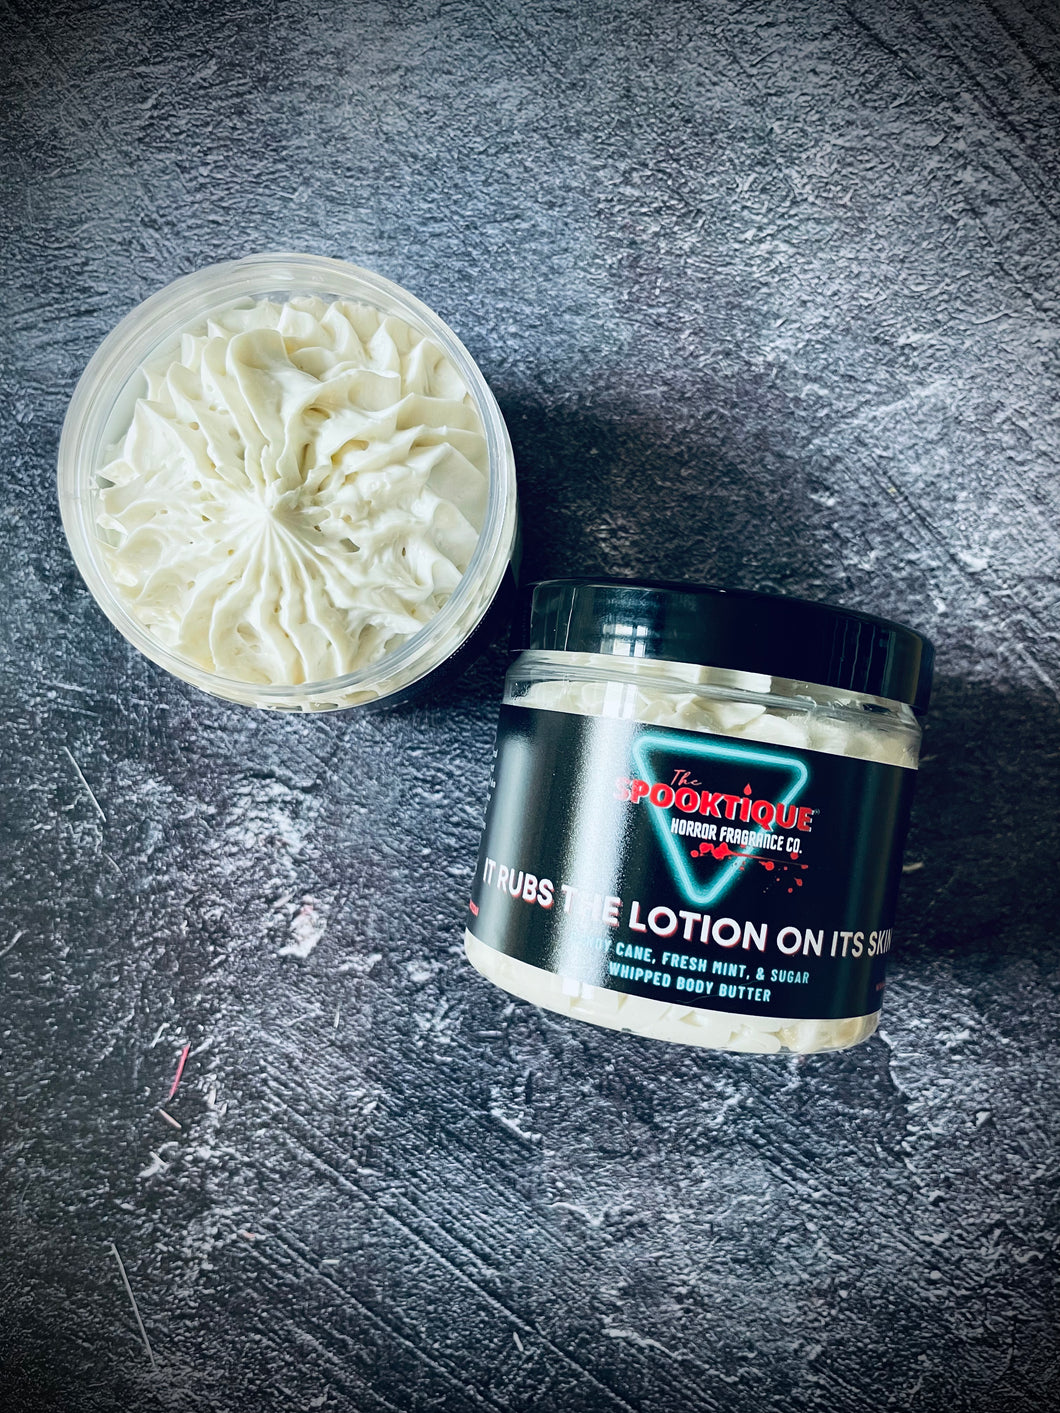 It Rubs the Lotion On Its Skin - Candy Cane, Fresh Mint, & Spun Sugar Whipped Body Butter